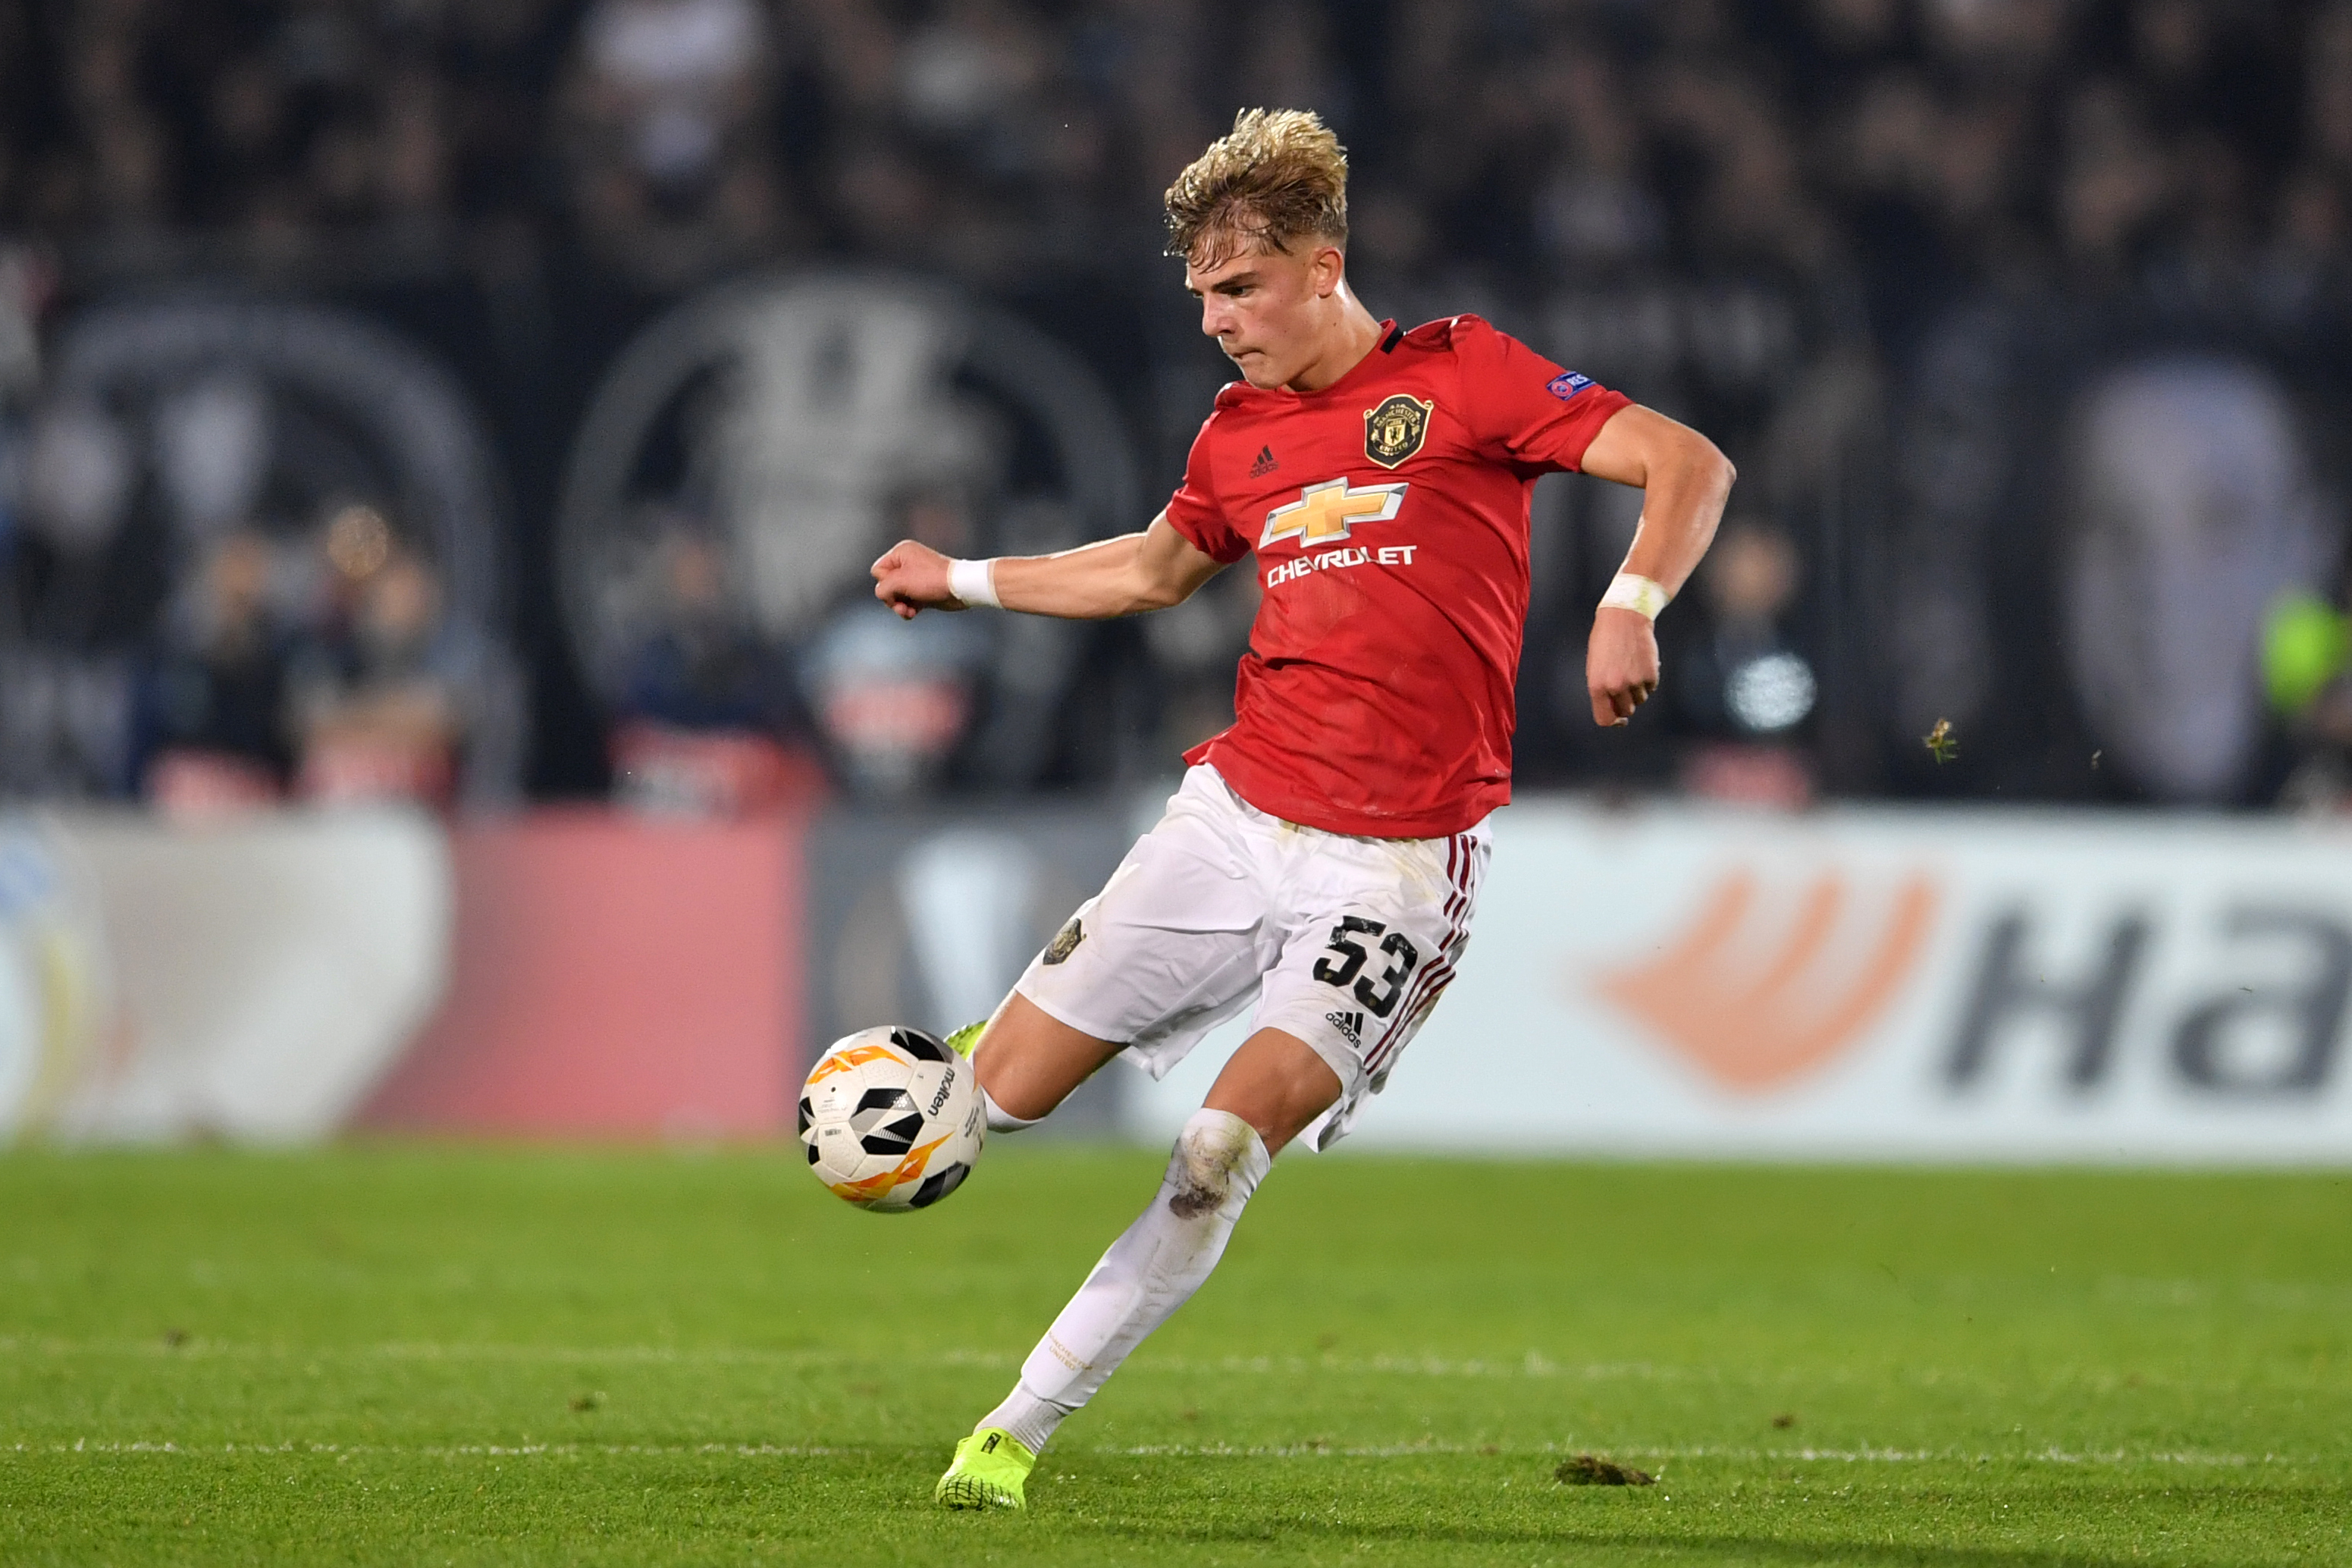 Manchester United's English defender Brandon Williams controls the ball during the UEFA Europa league group L football match between Partizan Belgrade and Manchester United at the Partizan stadium in Belgrade on October 24, 2019. (Photo by ANDREJ ISAKOVIC / AFP) (Photo by ANDREJ ISAKOVIC/AFP via Getty Images)